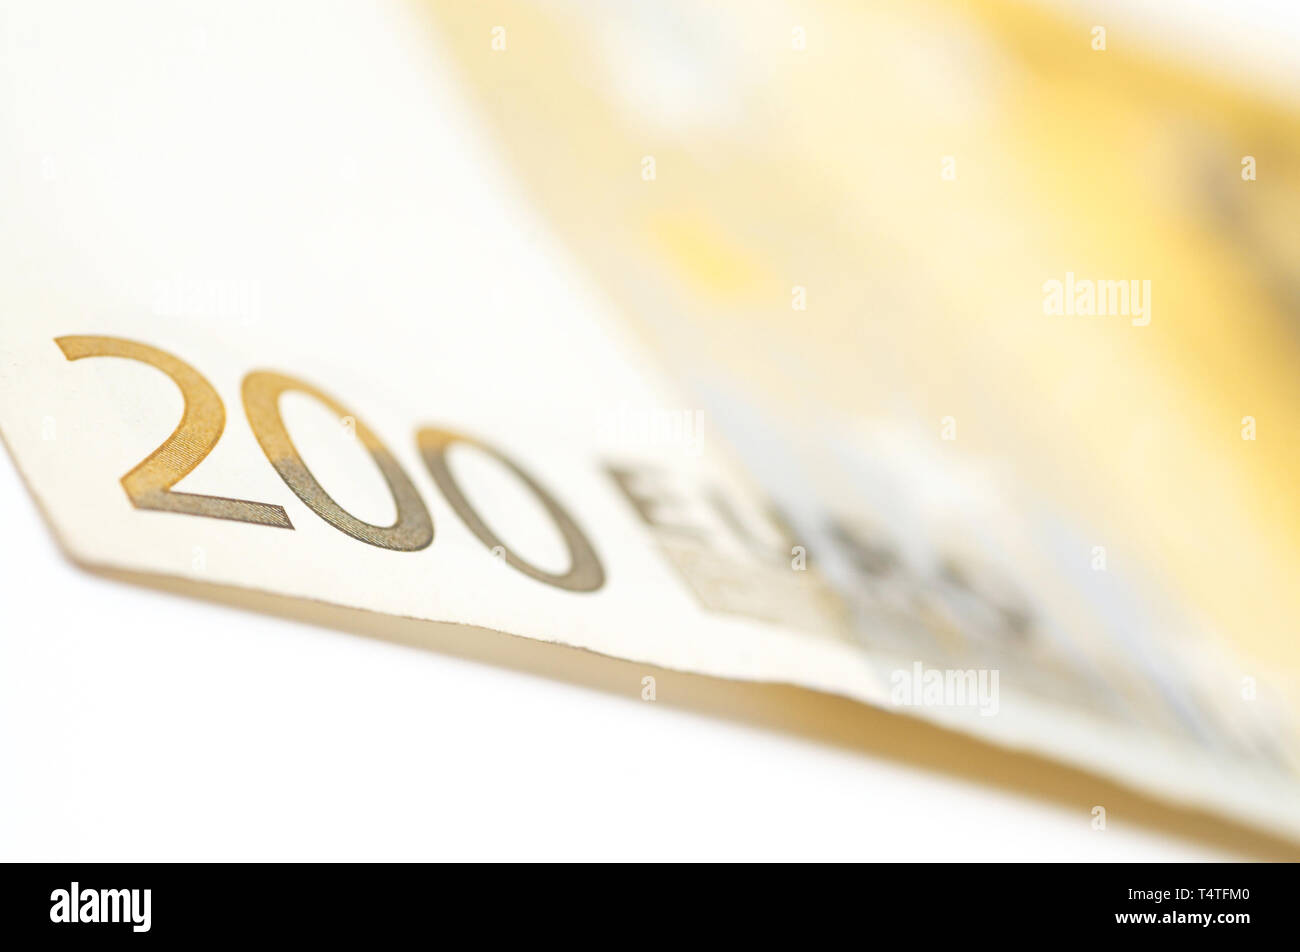 euro currency close up on white Stock Photo